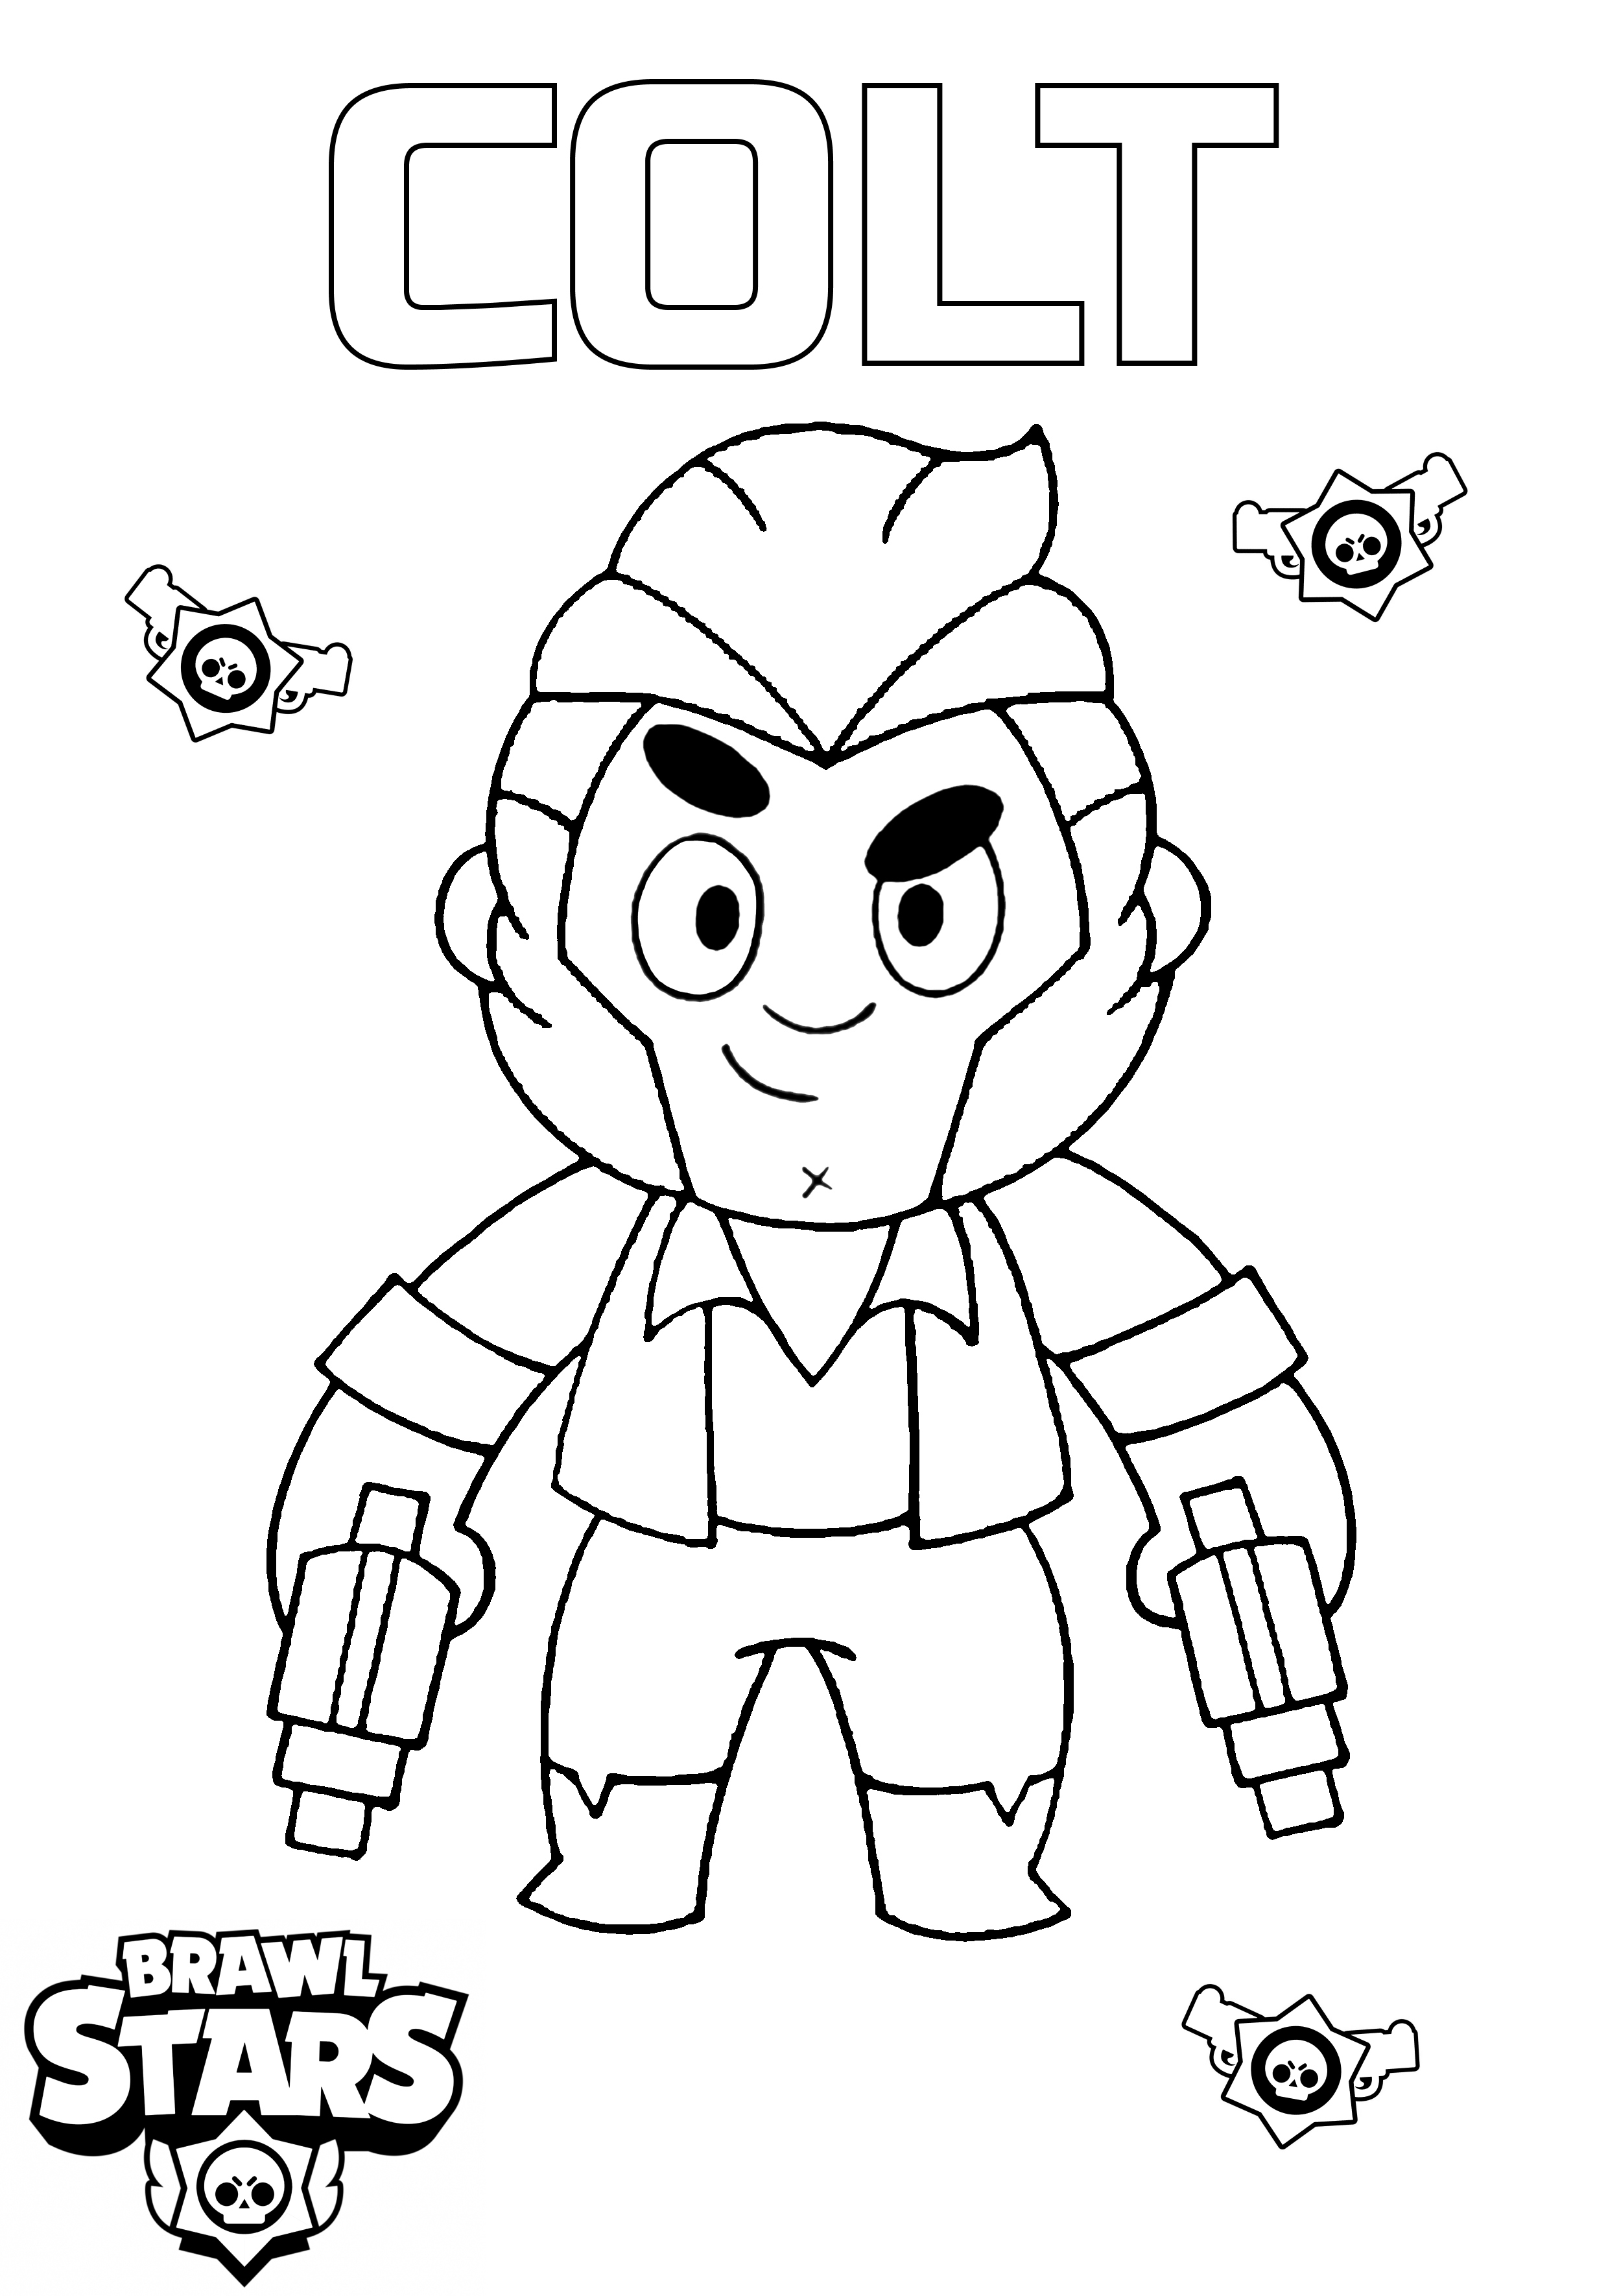 Coloring page Brawl Stars Colt fighter